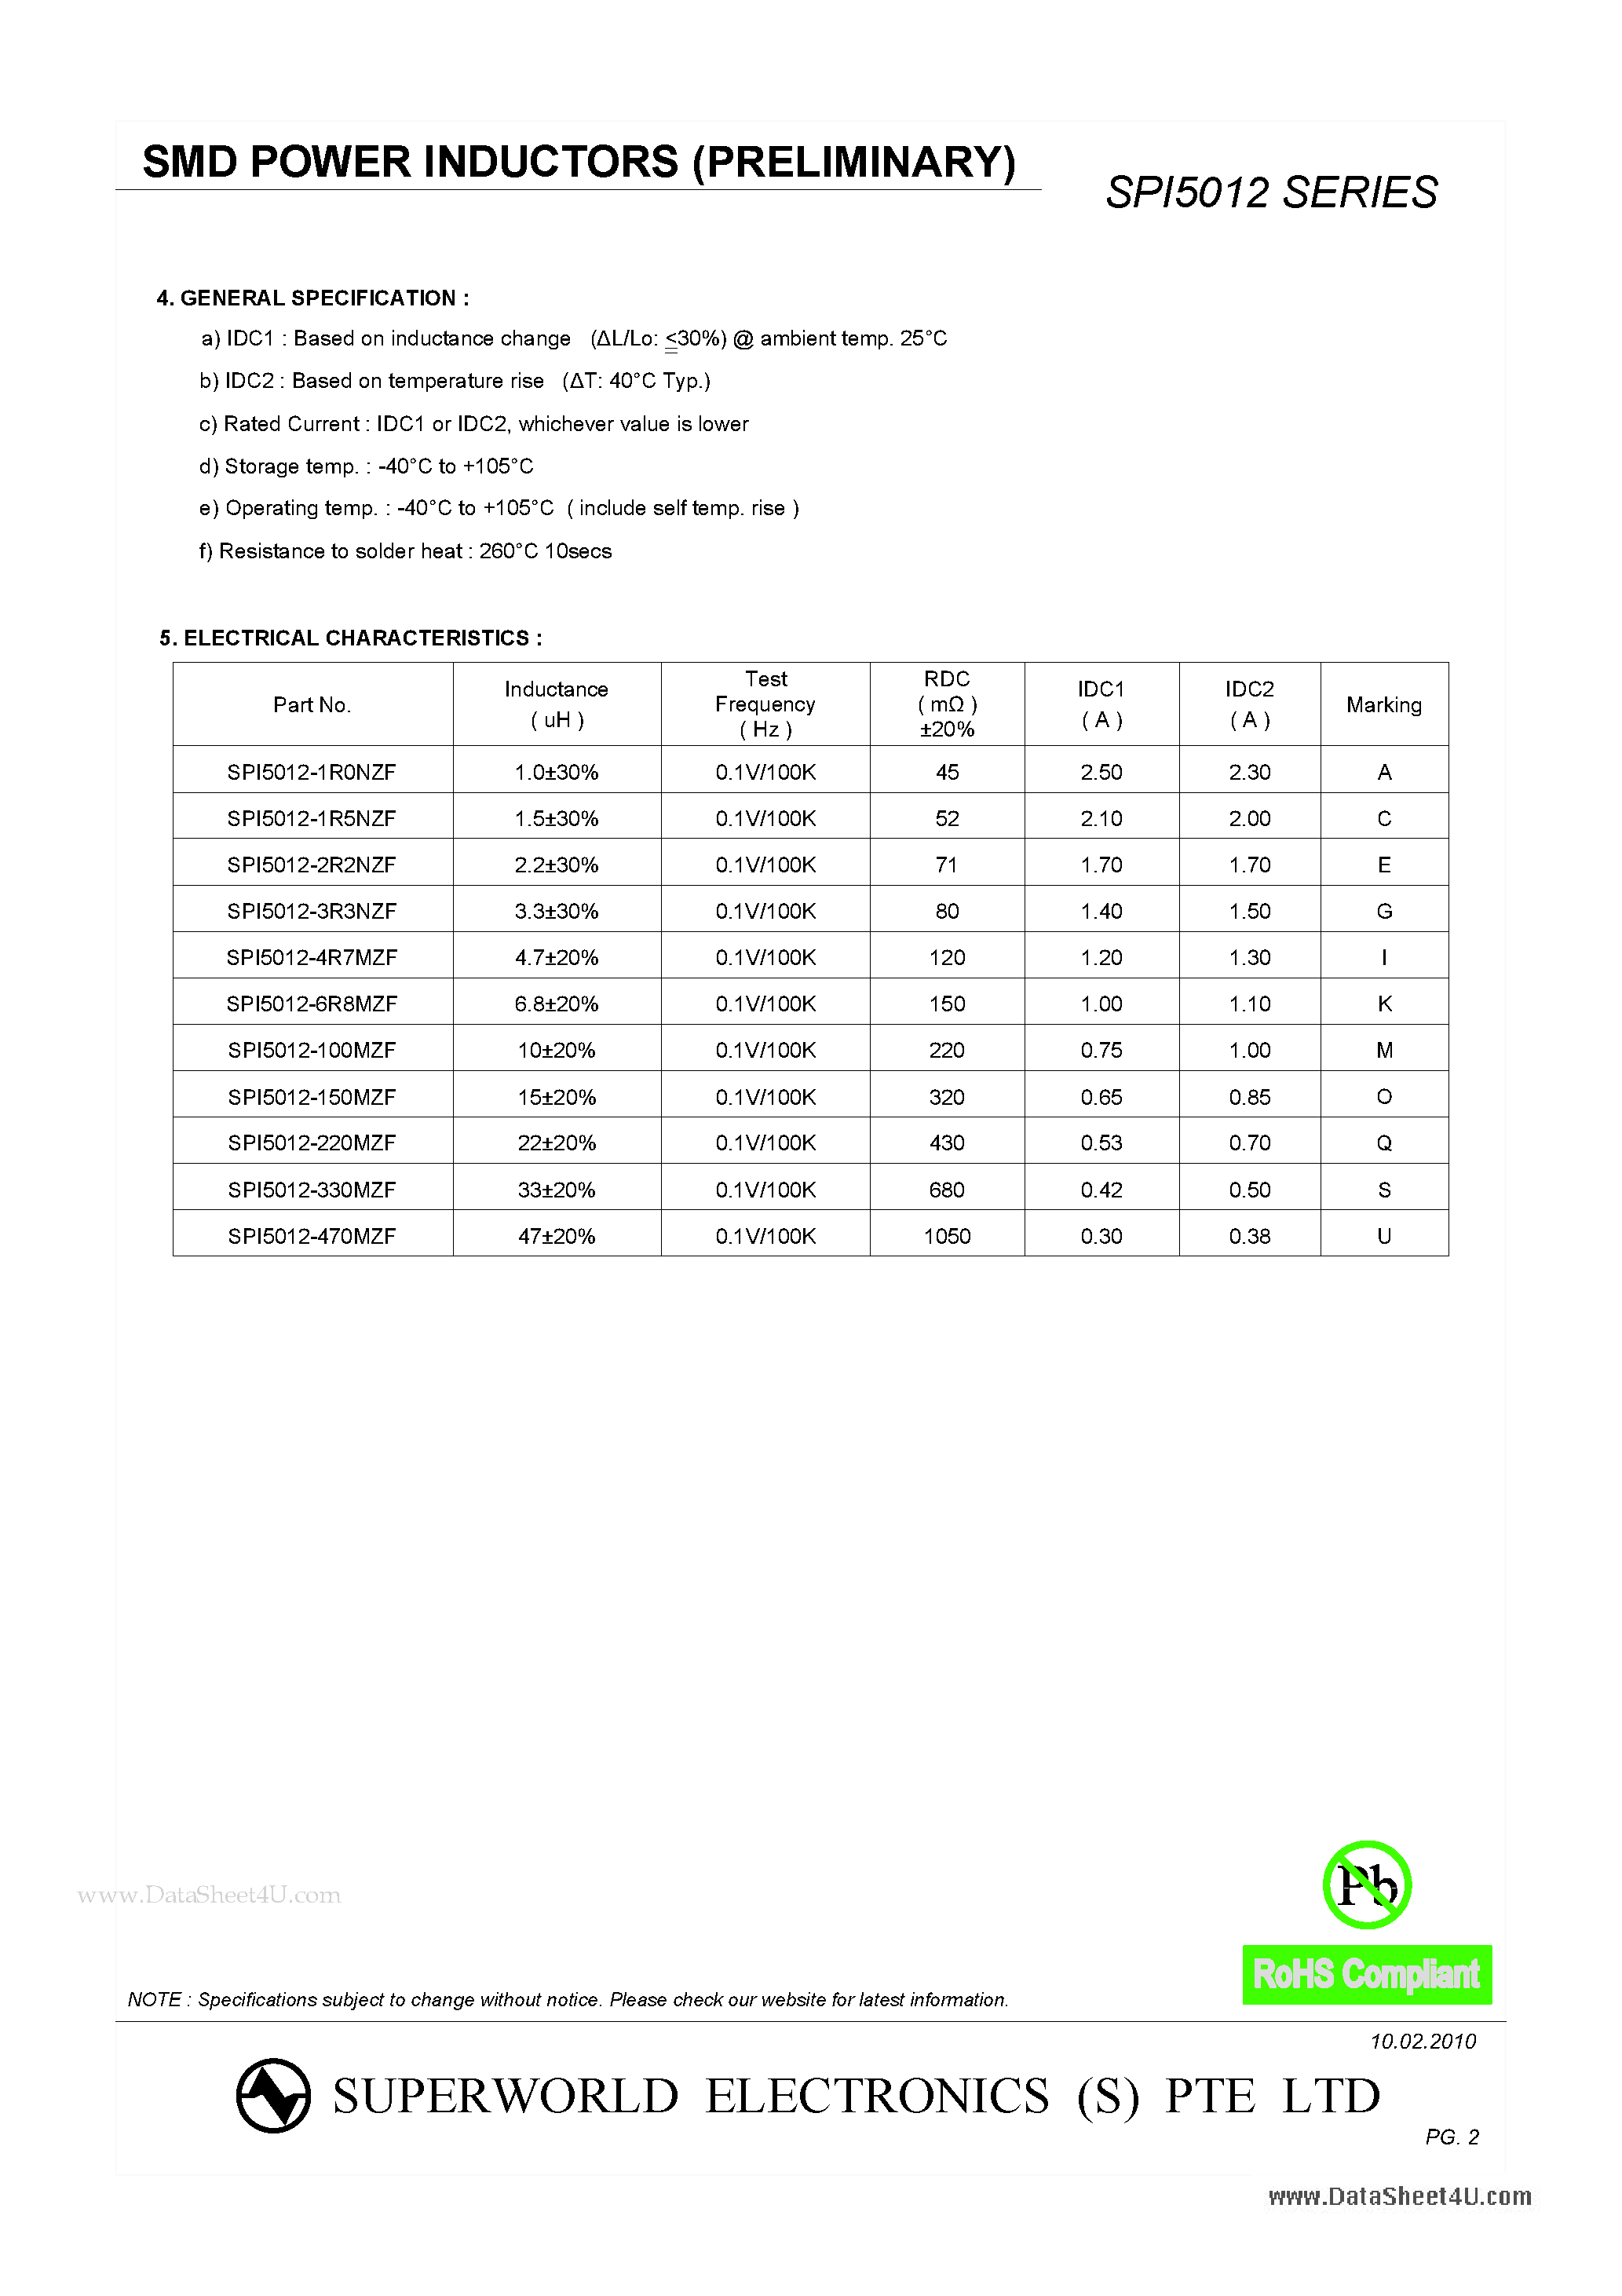 Datasheet SPI5012 - SMD POWER INDUCTORS page 2